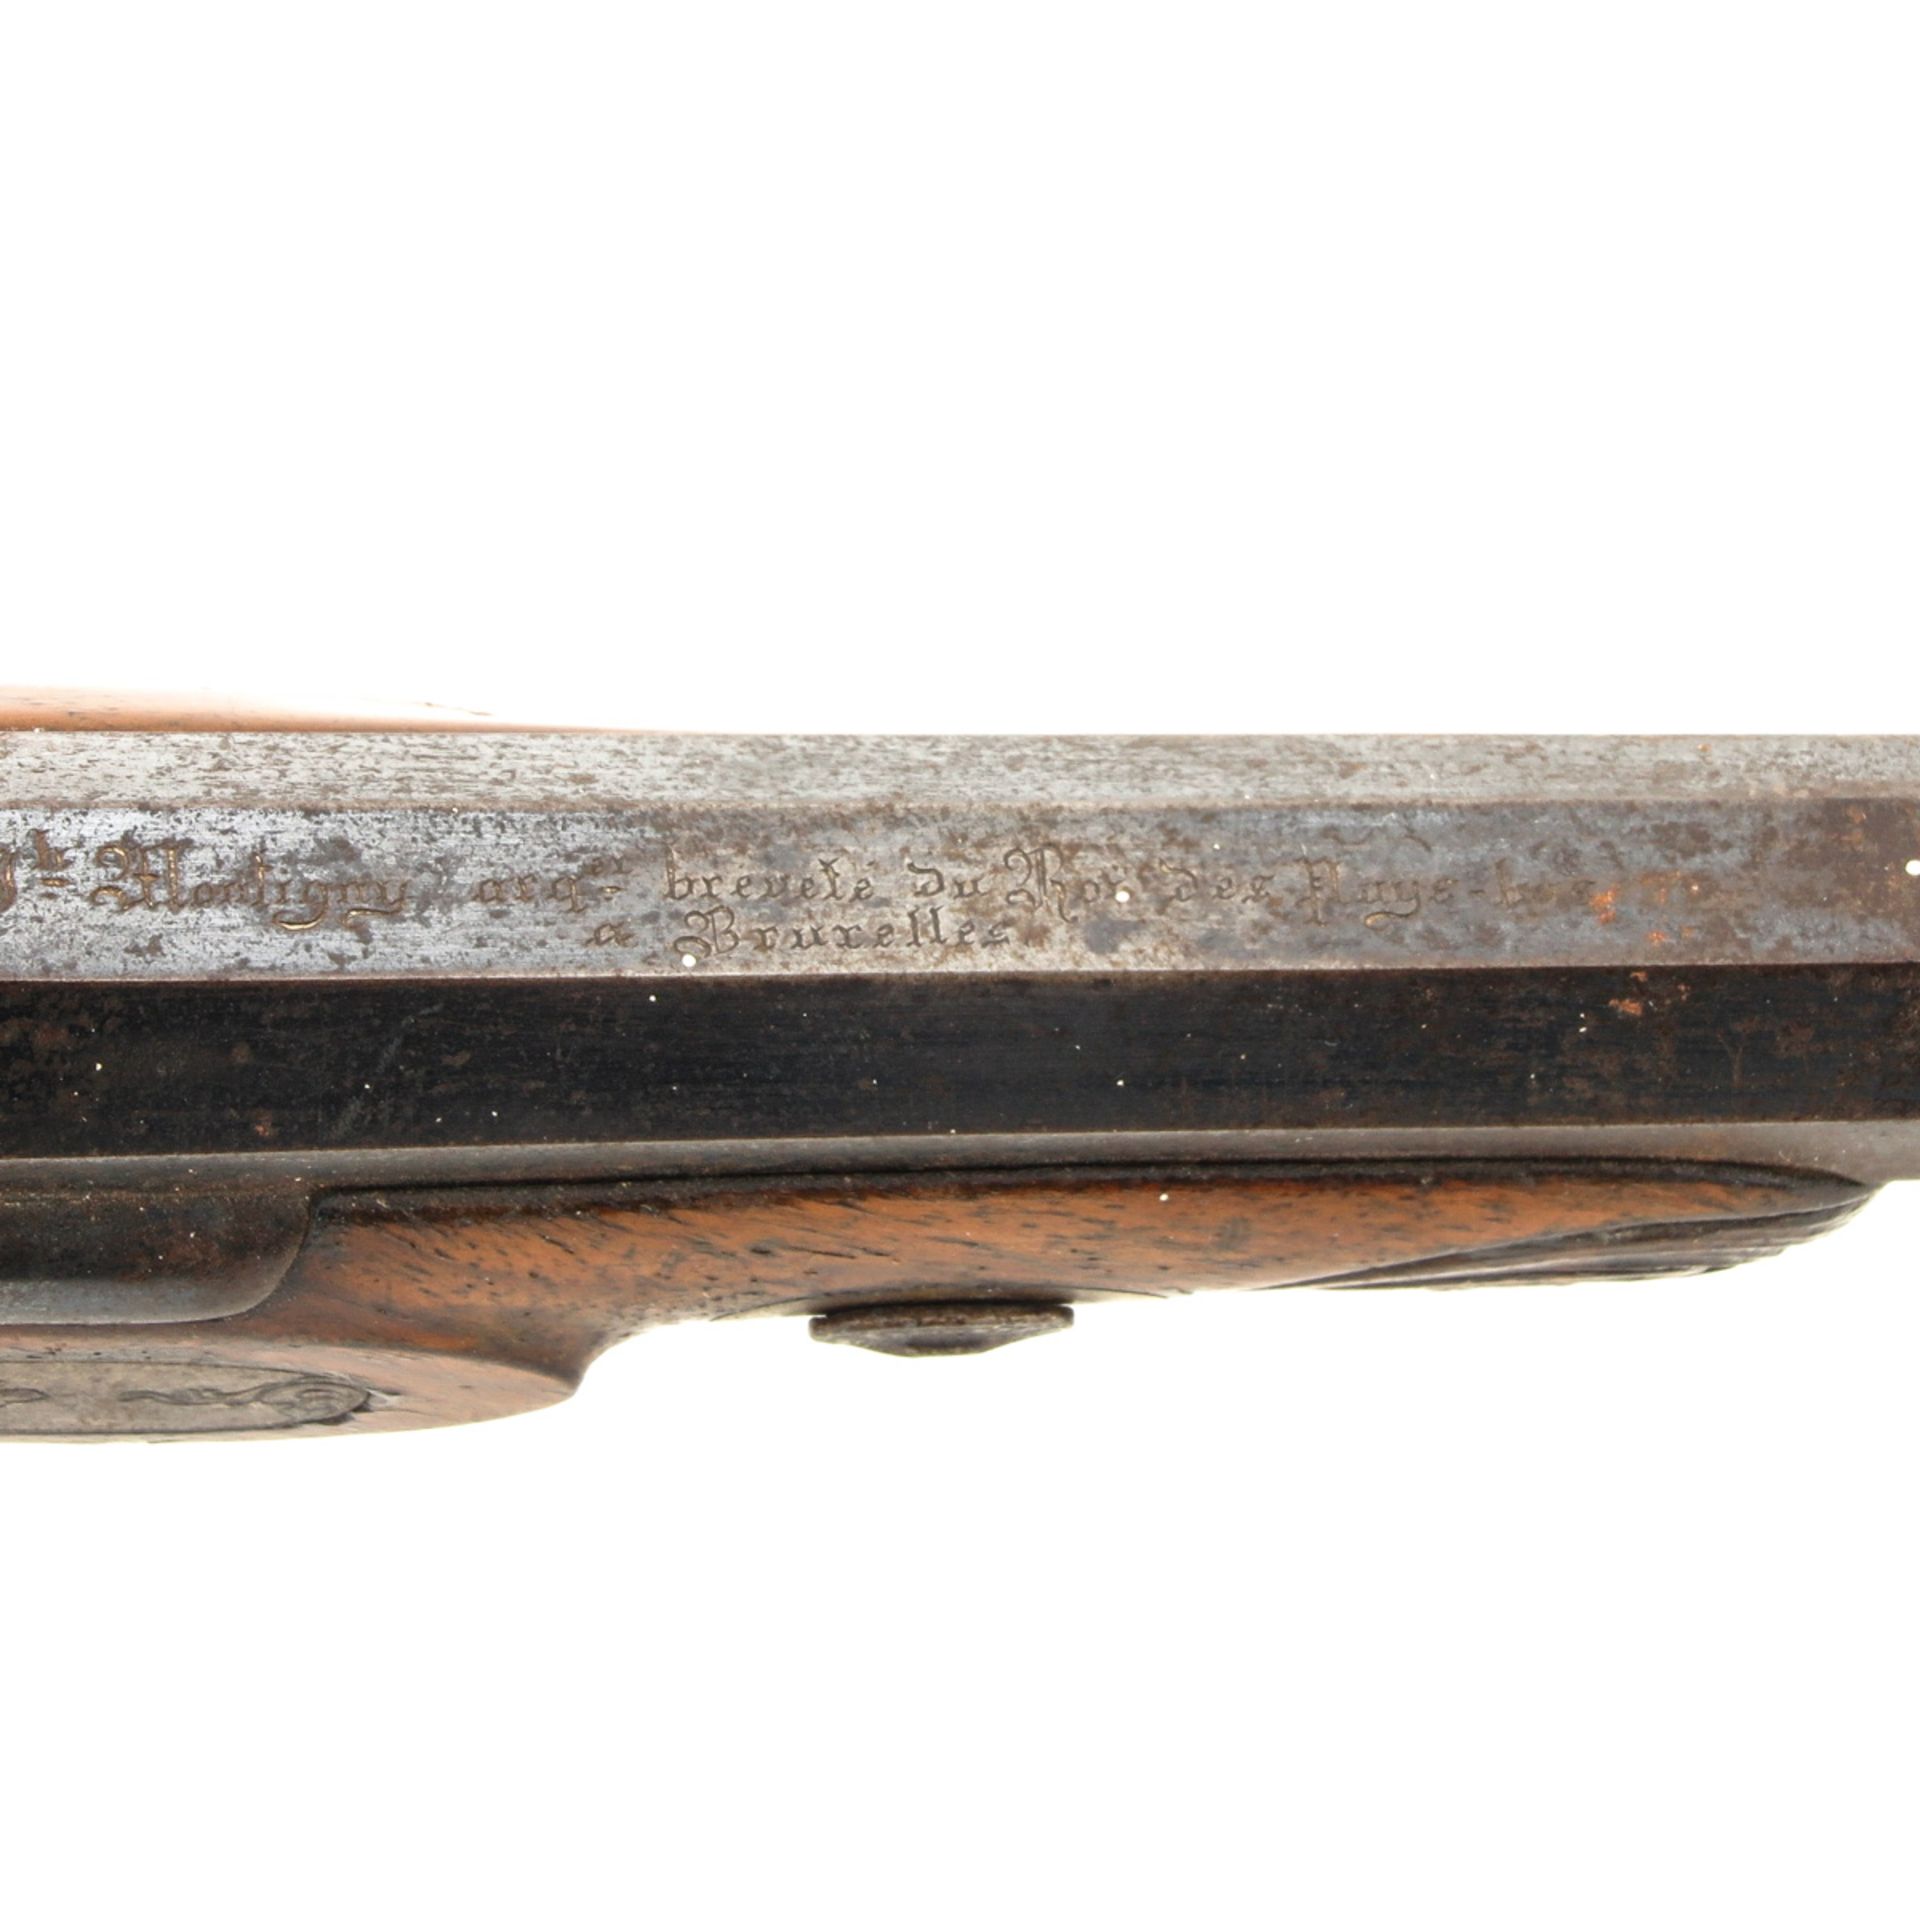 An Antique Pistol - Image 5 of 10